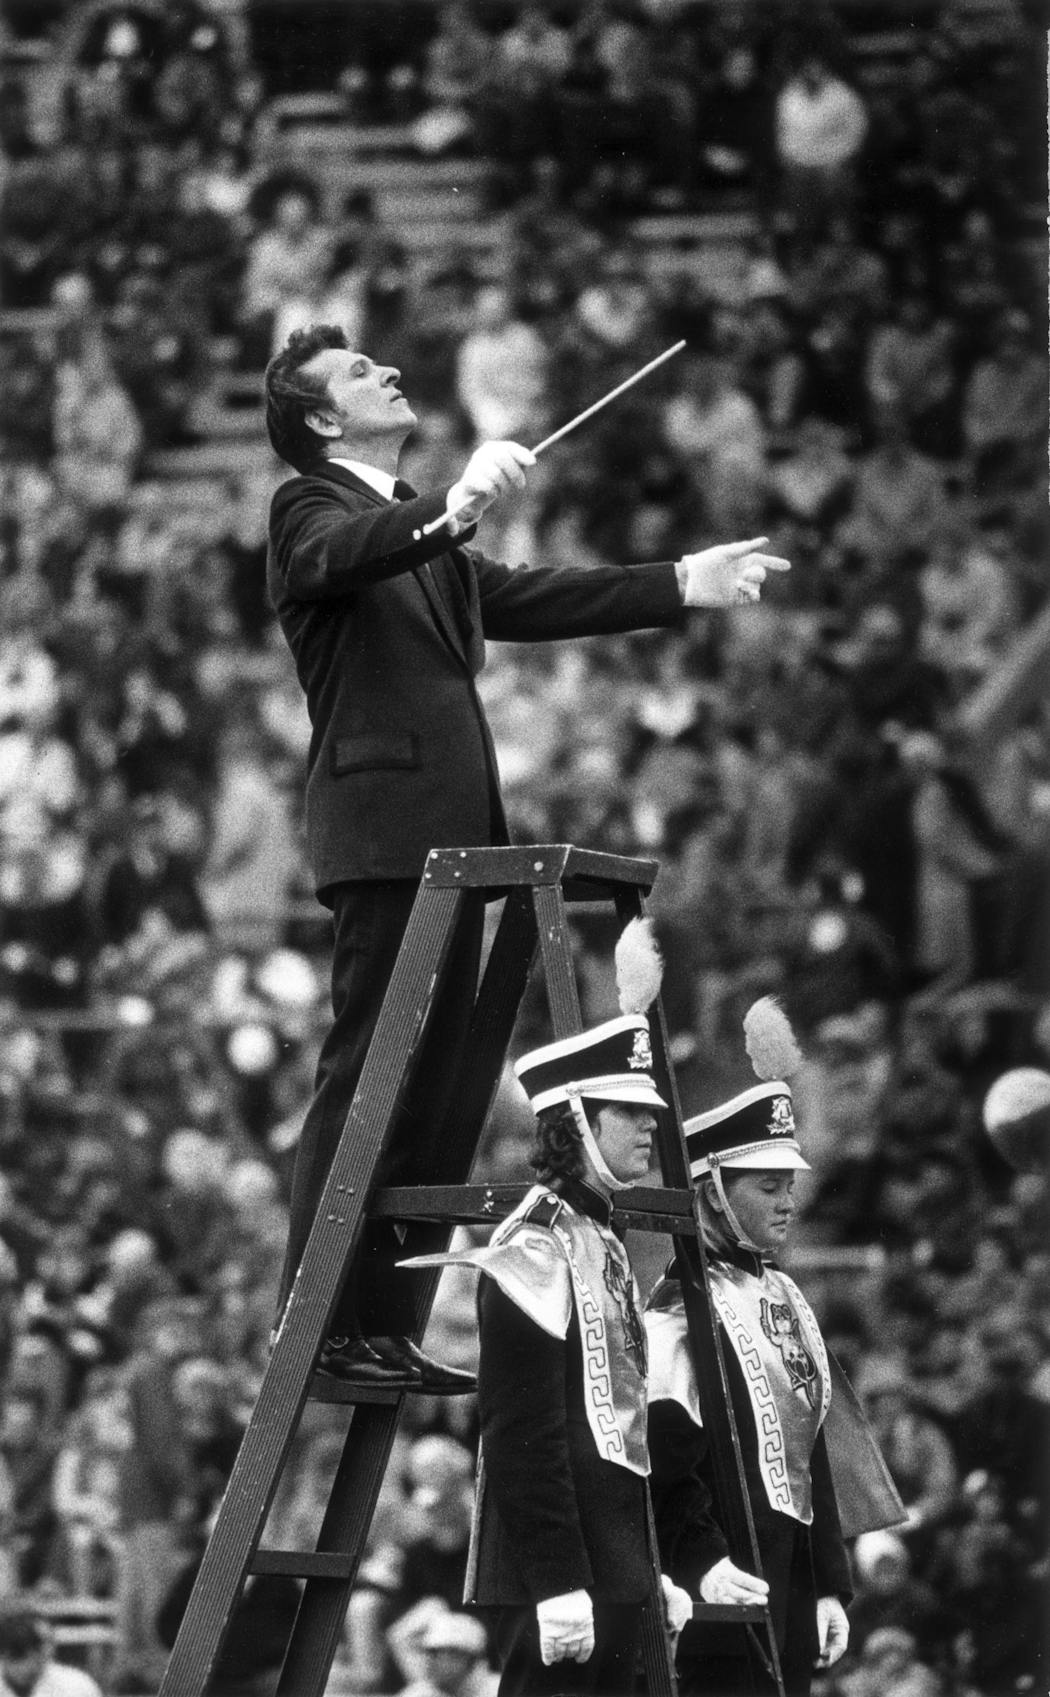 Dr. Frank Bencriscutto, known as “Dr. Ben,” conducted the marching band circa 1973, not long after it started to include women members. Note one man and one woman are flanking the ladder-podium in this photo.